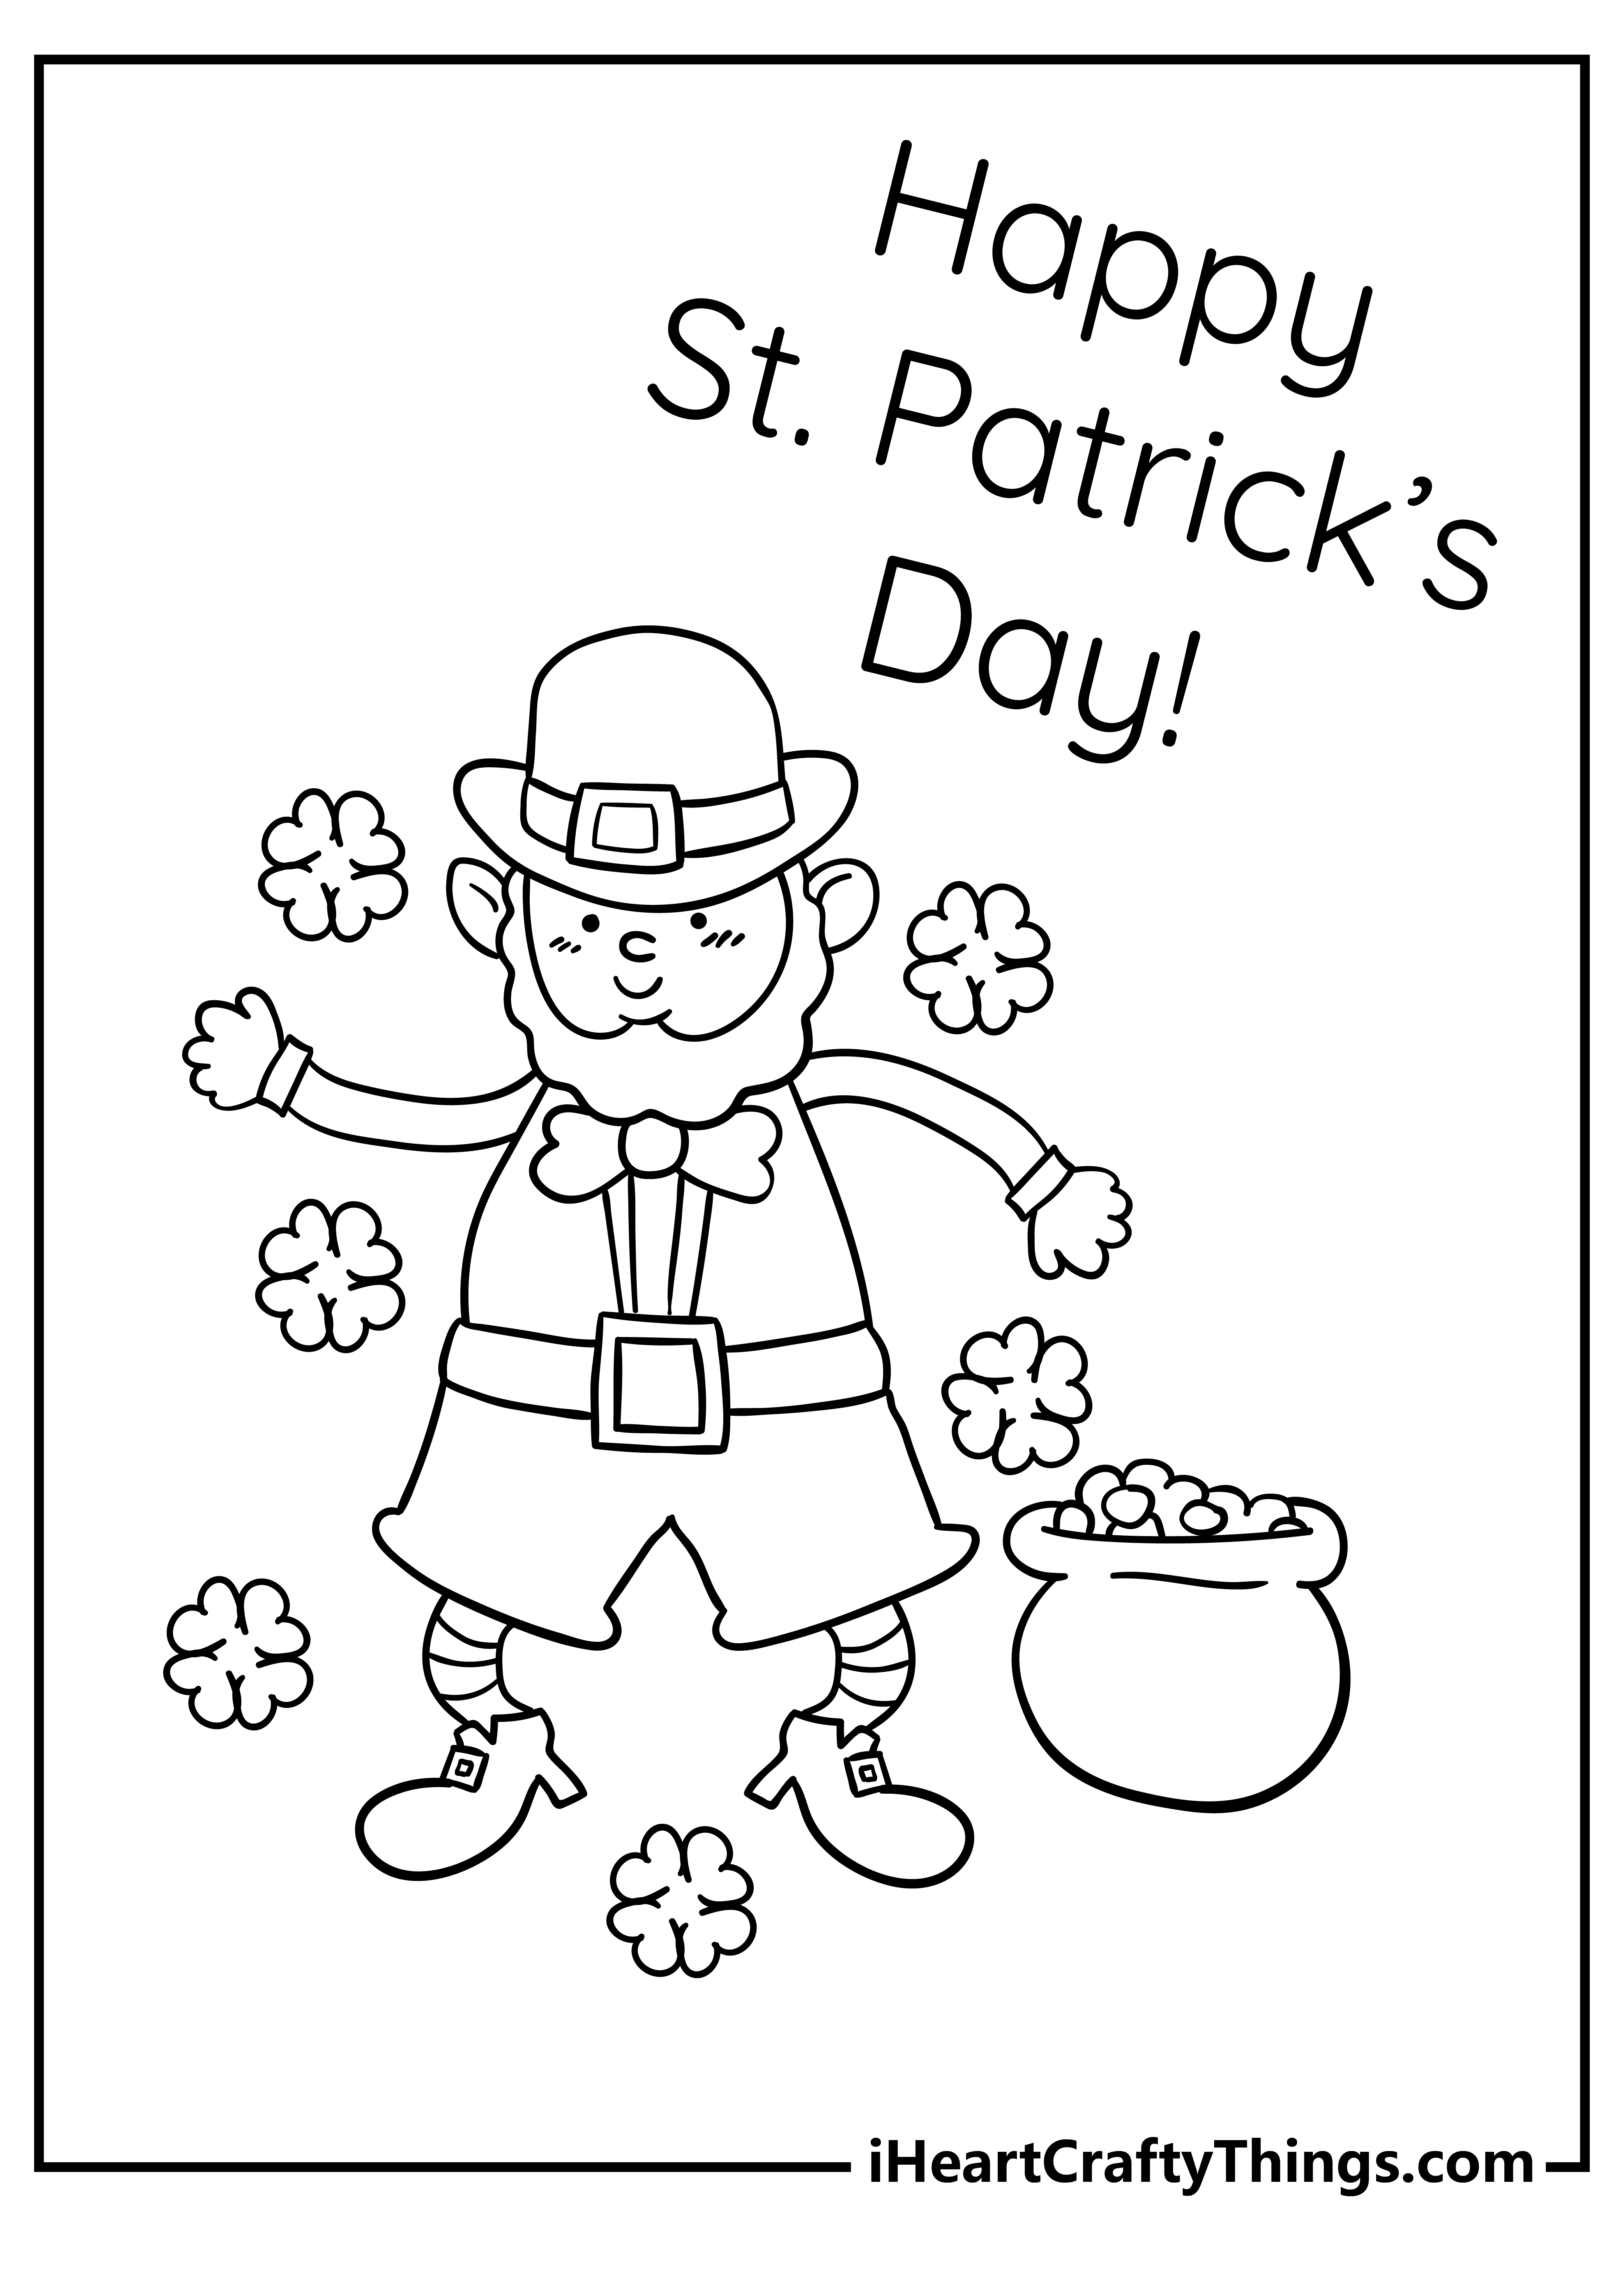 St Patrick’s Day Easy Coloring Pages